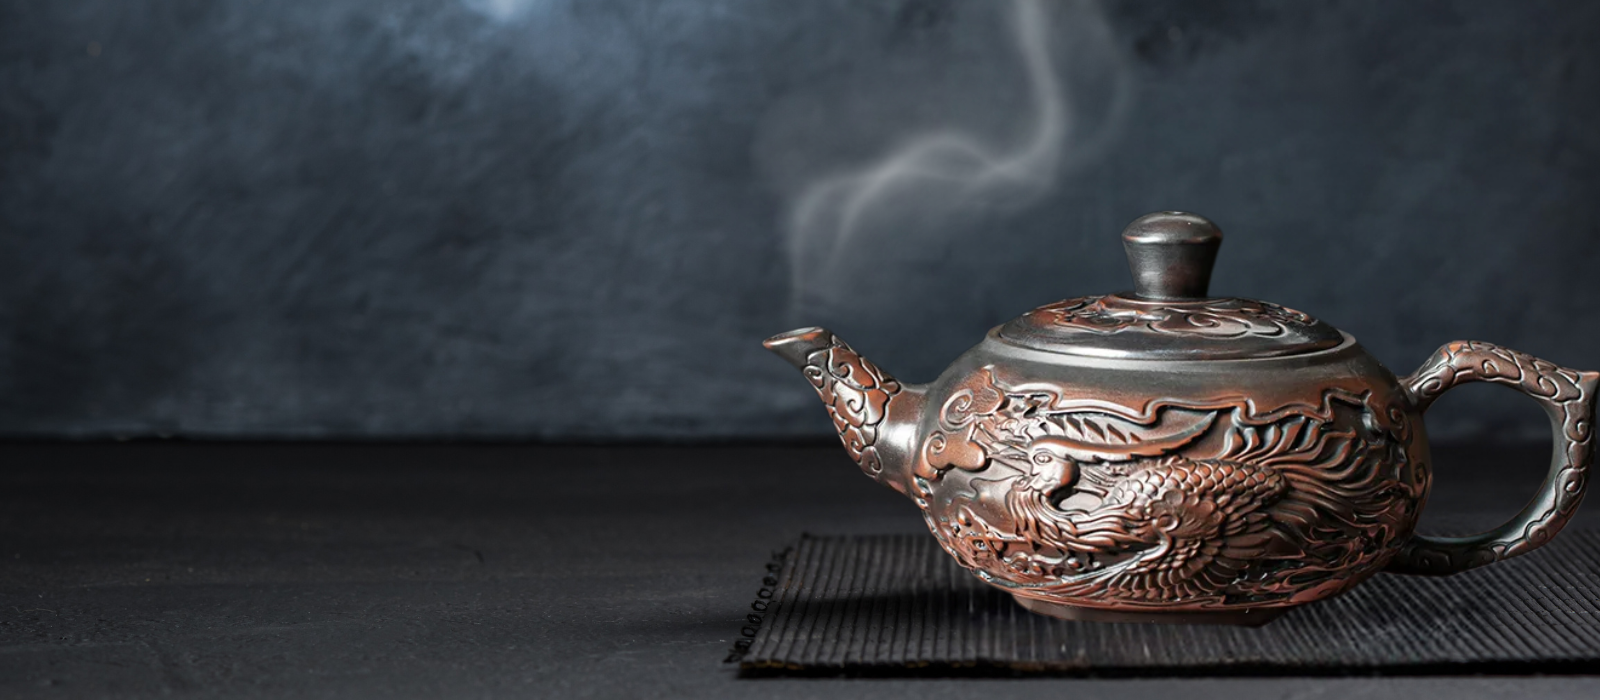 Enrich your tea ceremonies with the Purple Pottery Vintage Teapot, a meticulously crafted piece influenced by traditional Chinese tea culture. Handmade from premium ceramic adorned with intricate carvings, this Kung Fu teapot seamlessly blends elegance with functionality, serving as the ideal vessel for brewing and presenting your beloved teas.